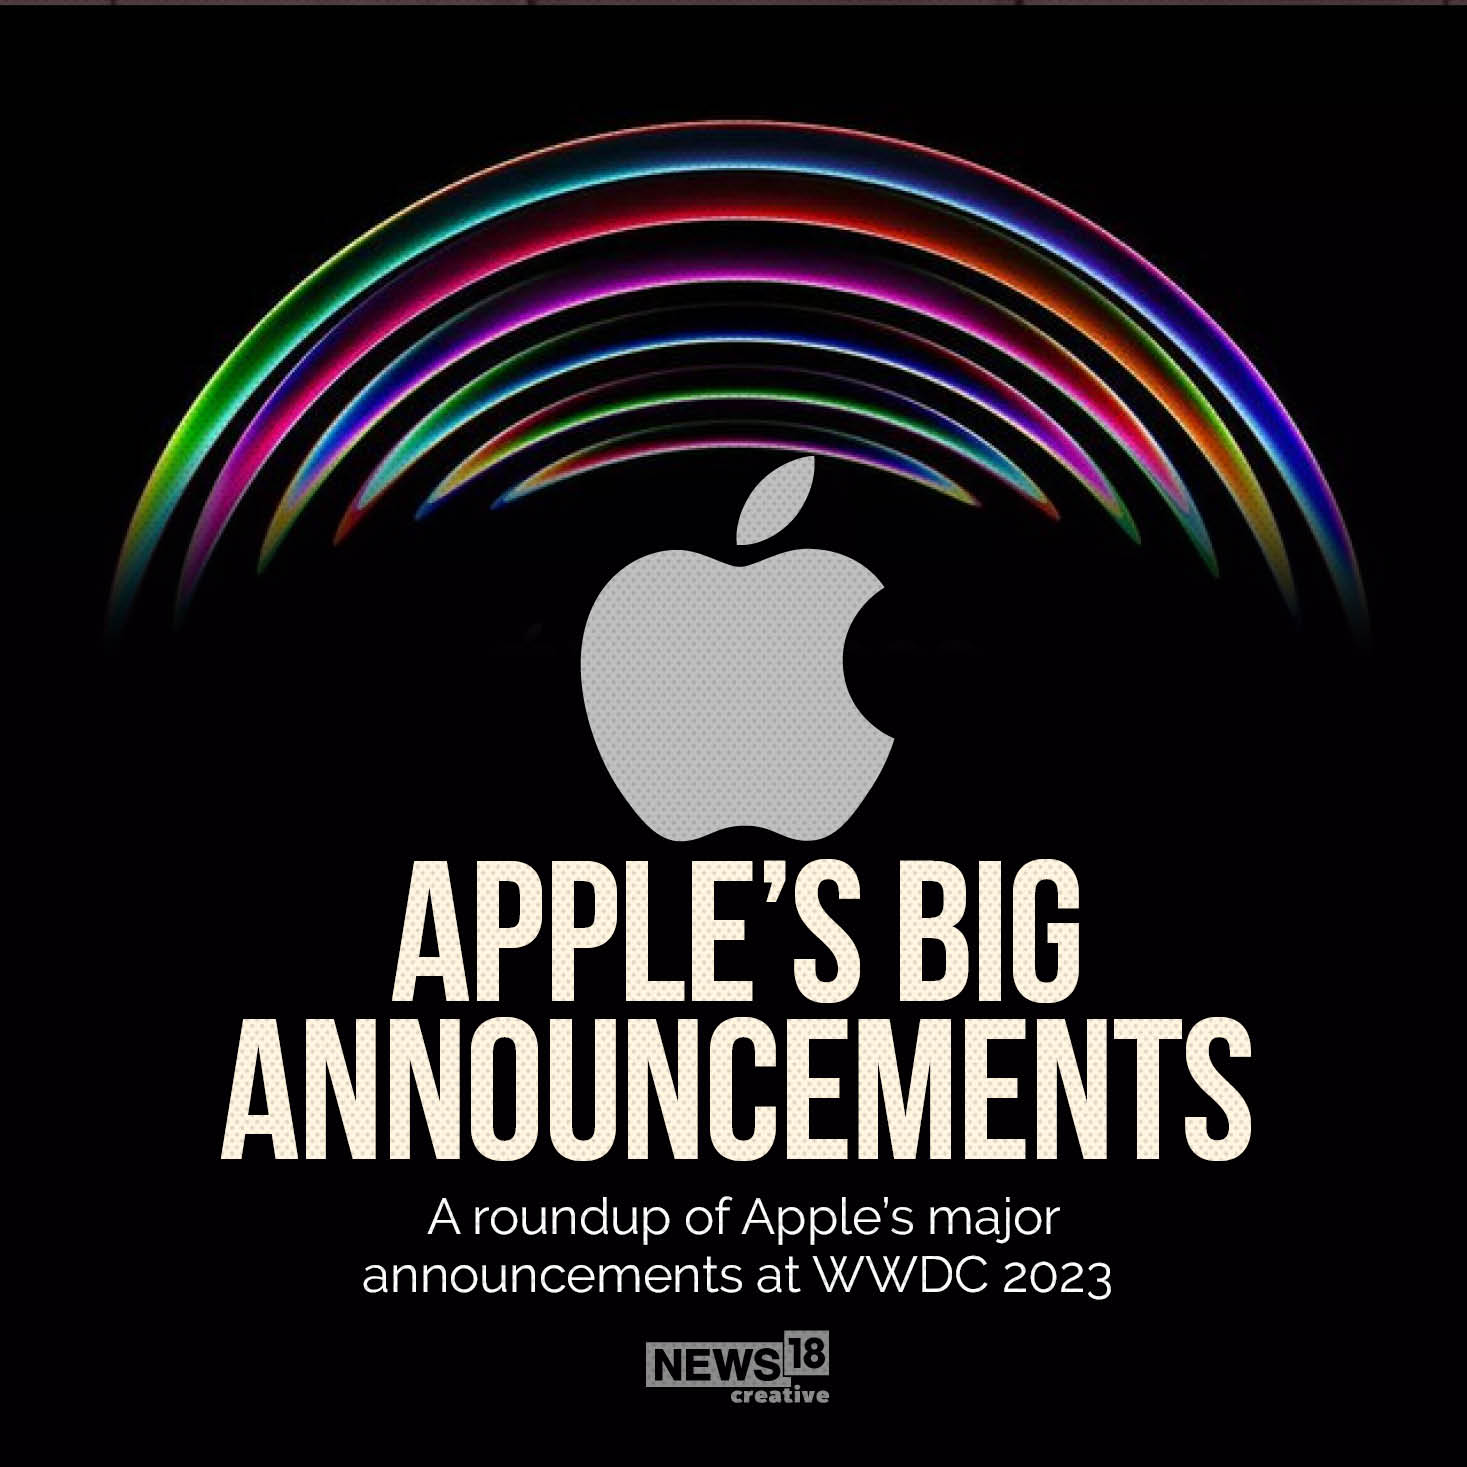 WWDC 2023: From Vision Pro to MacBook Air, a round-up of Apple's major announcements